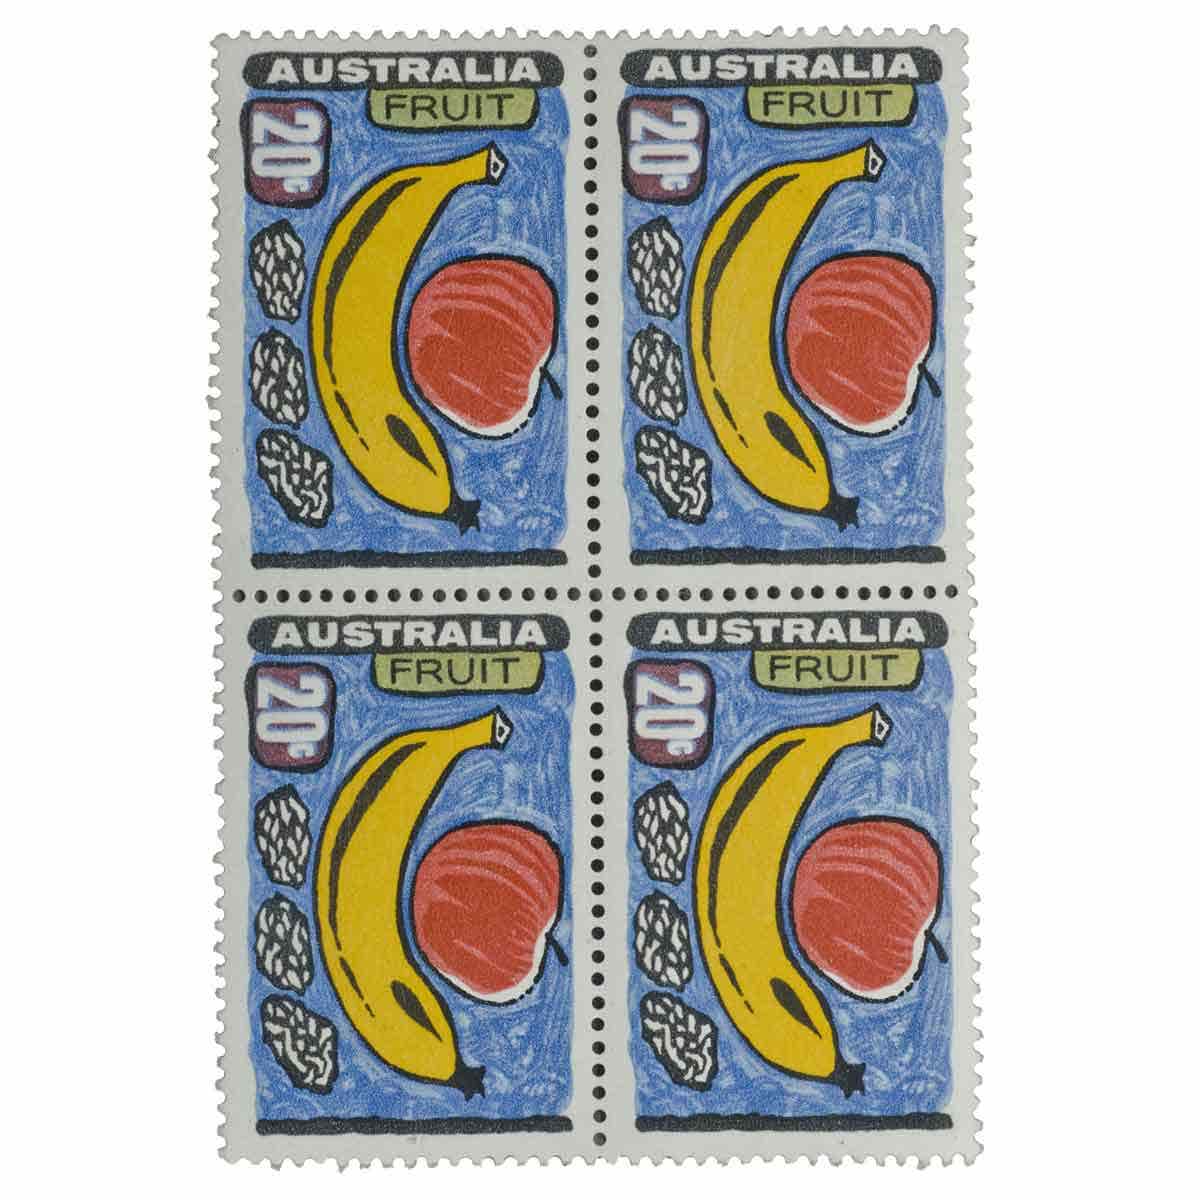 1972 Primary Produce Blocks of Four Set of 4 (16 stamps) Mint Unhinged